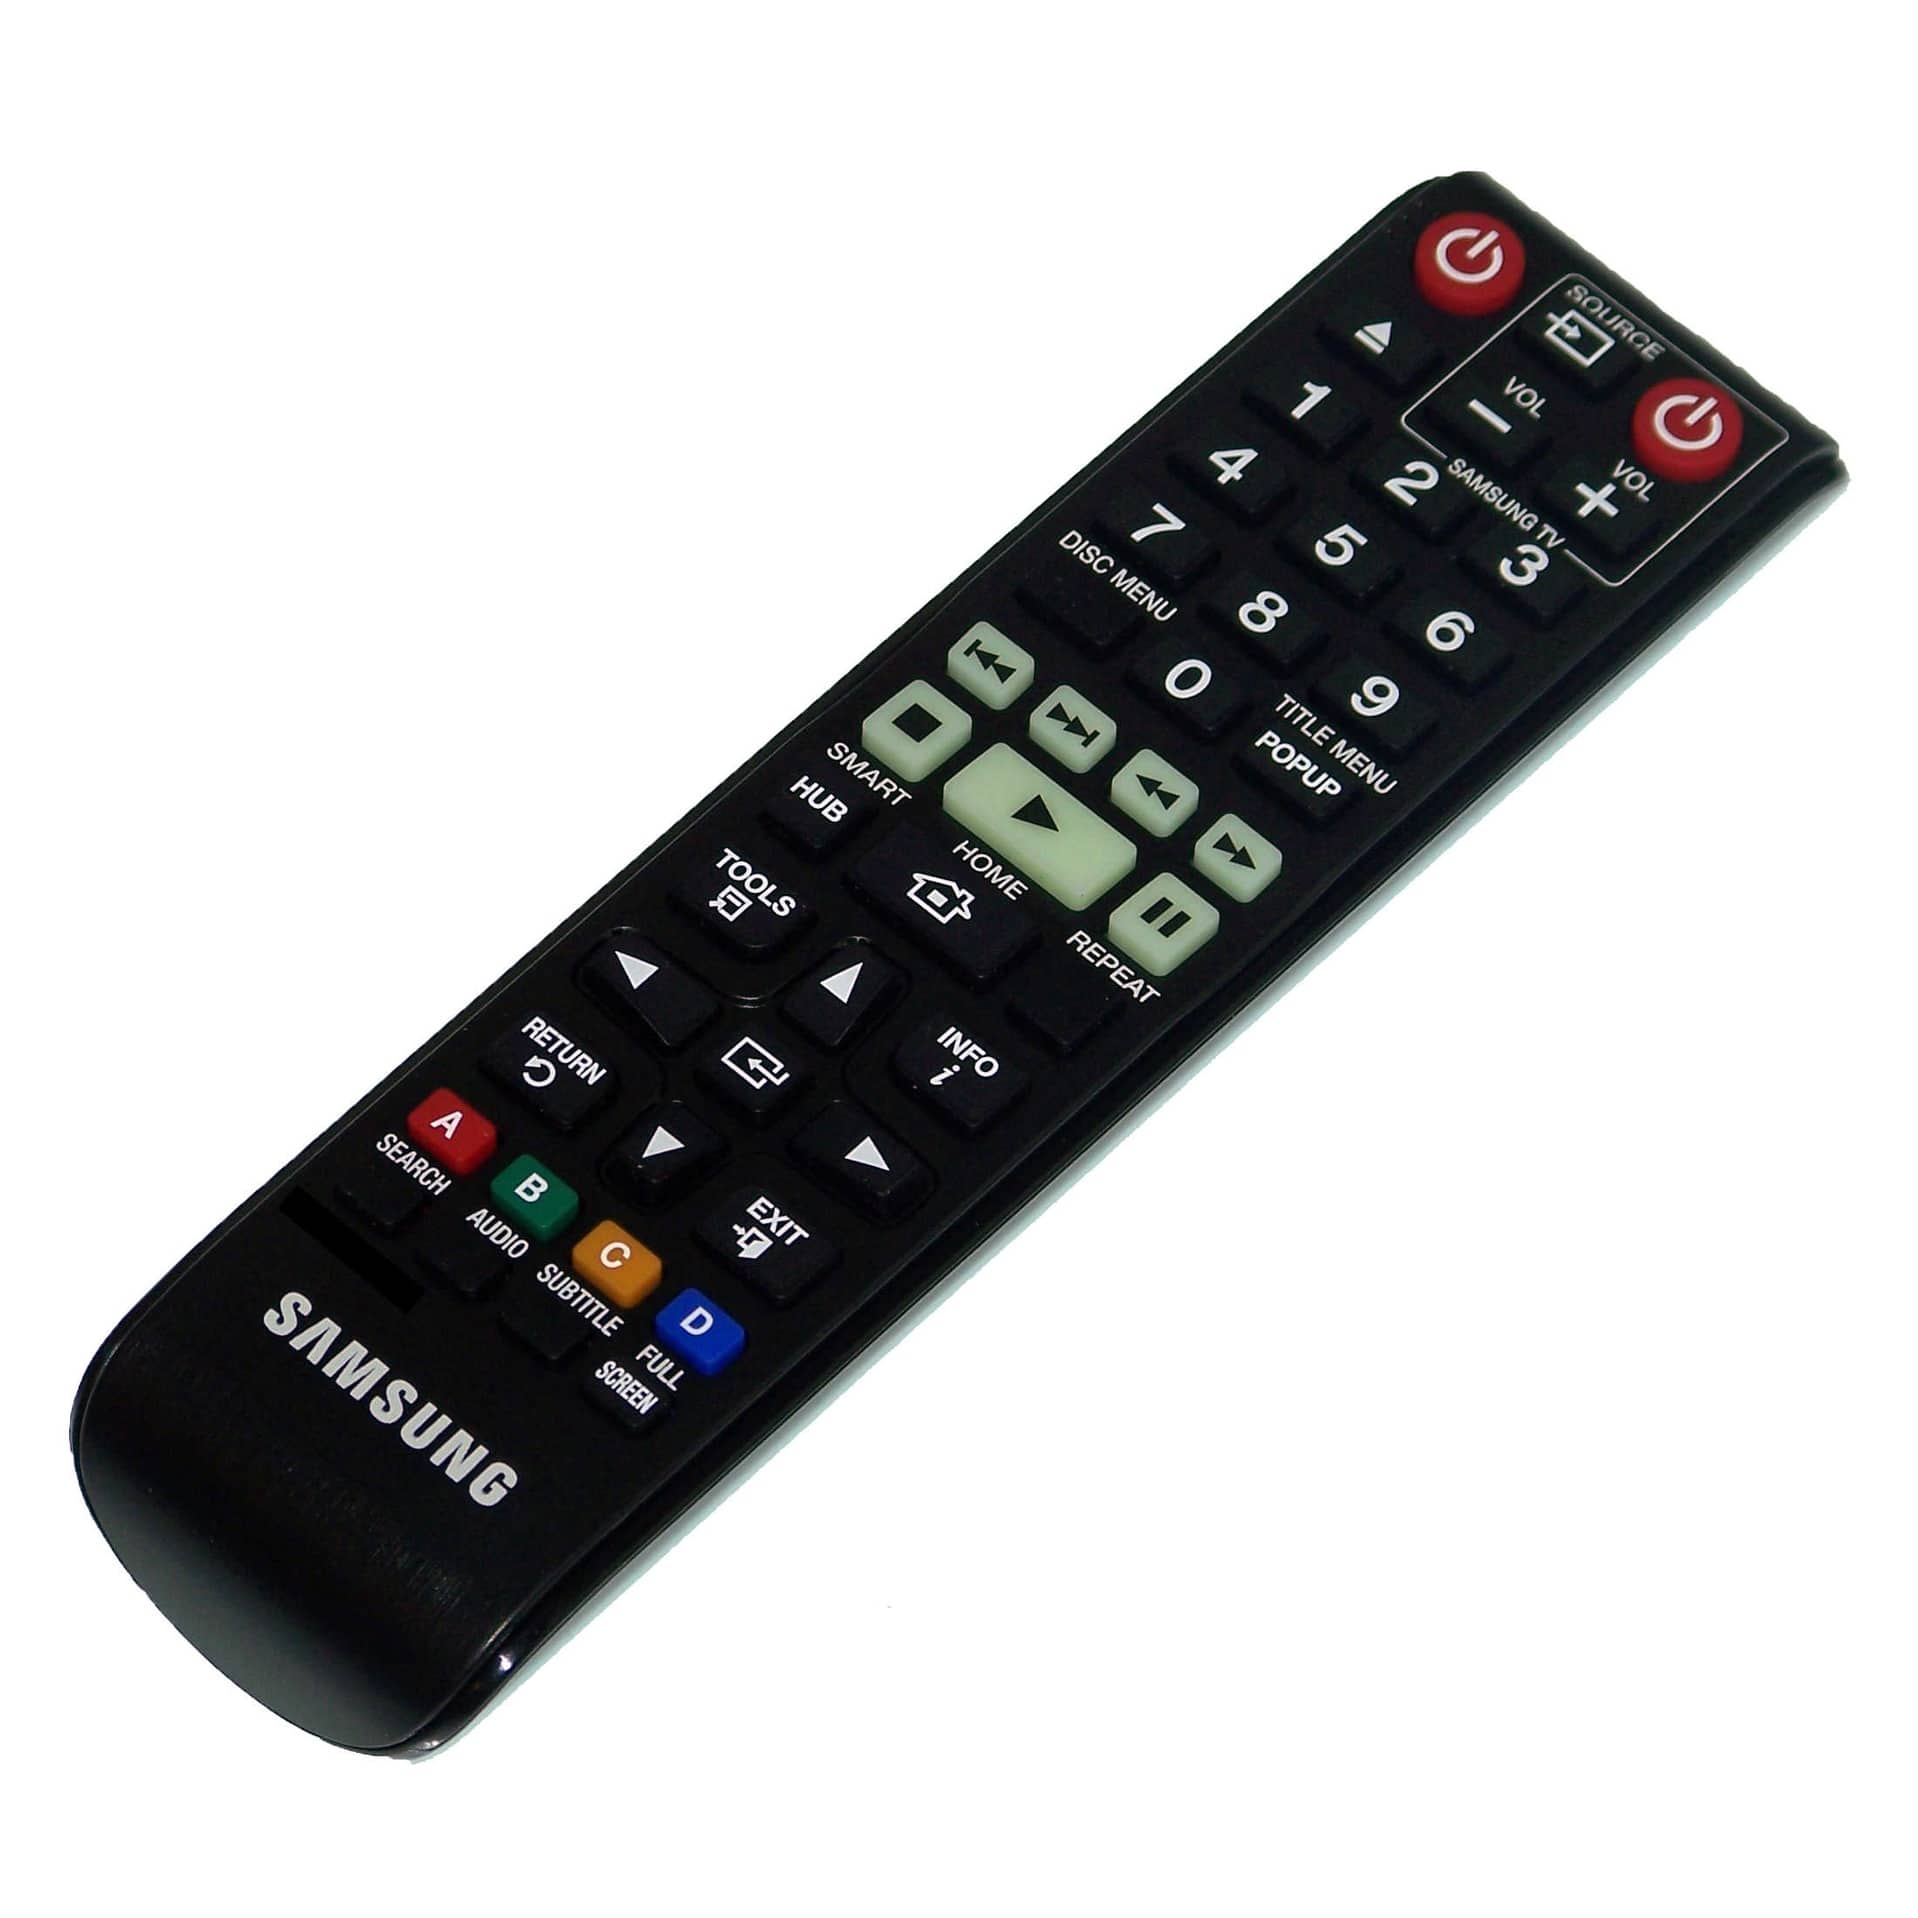 OEM Samsung Remote Control Shipped With BDJ6300 - ...